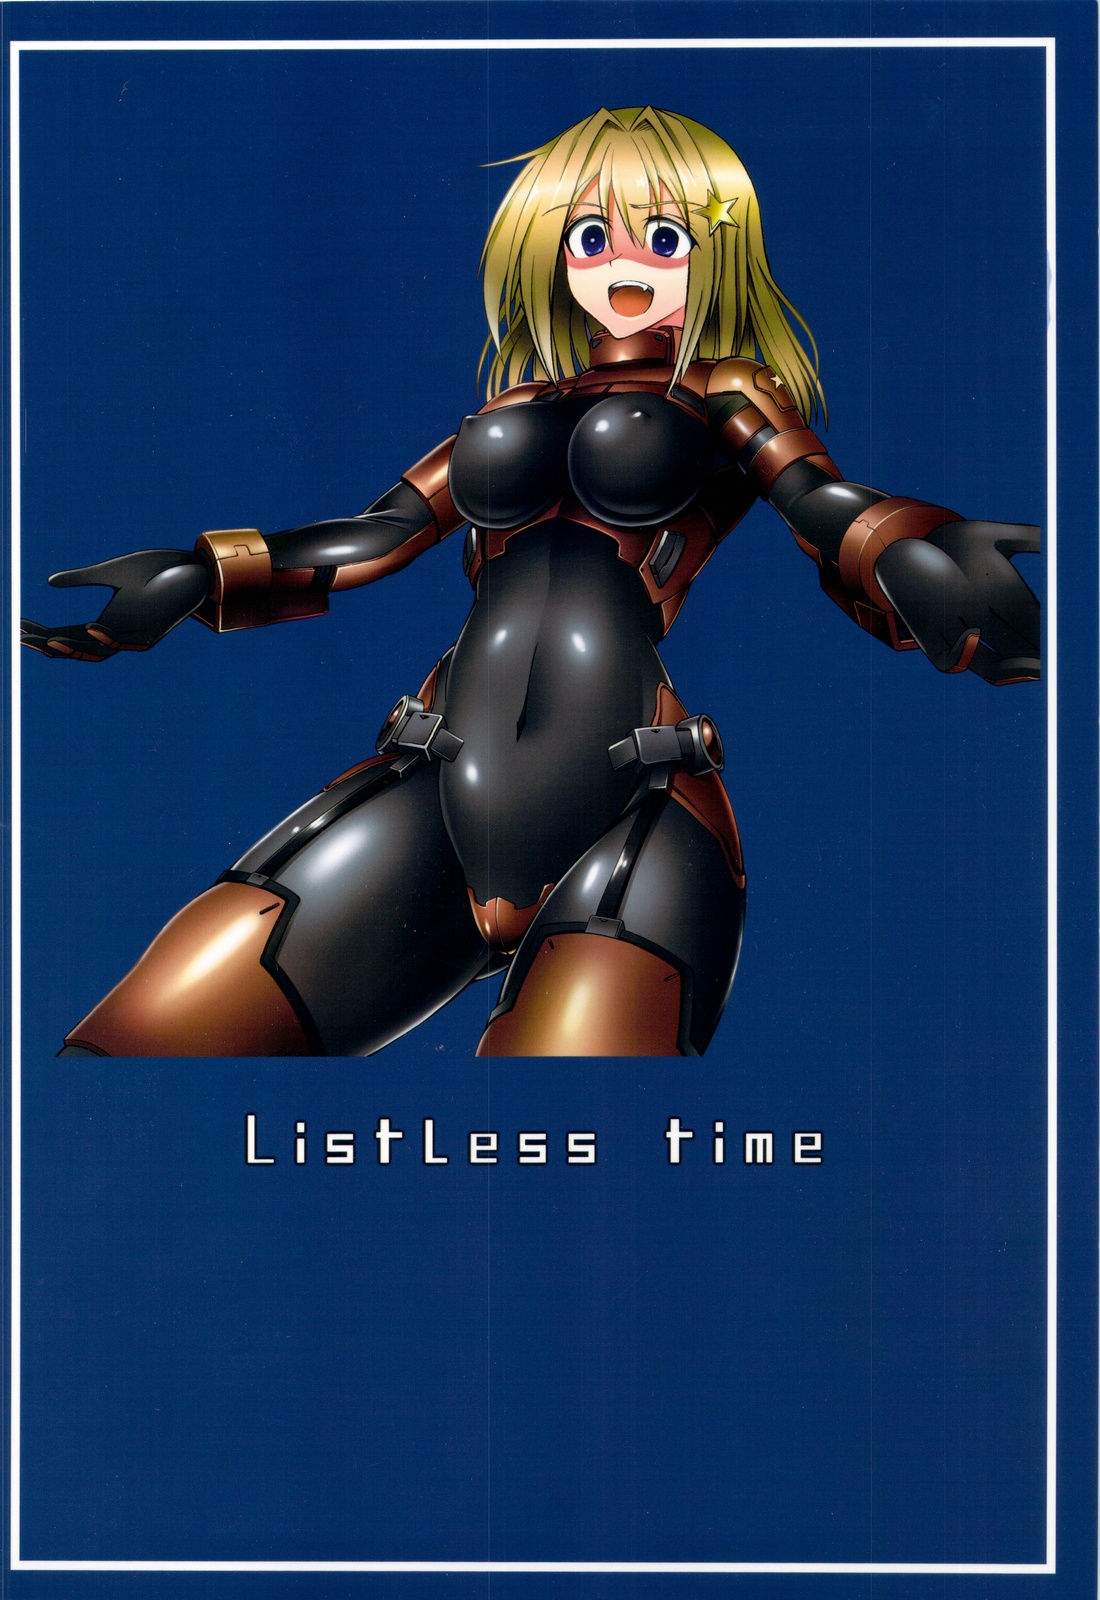 (COMIC1☆6) [listless time (ment)] Come Down Early! (Armored Core) 27